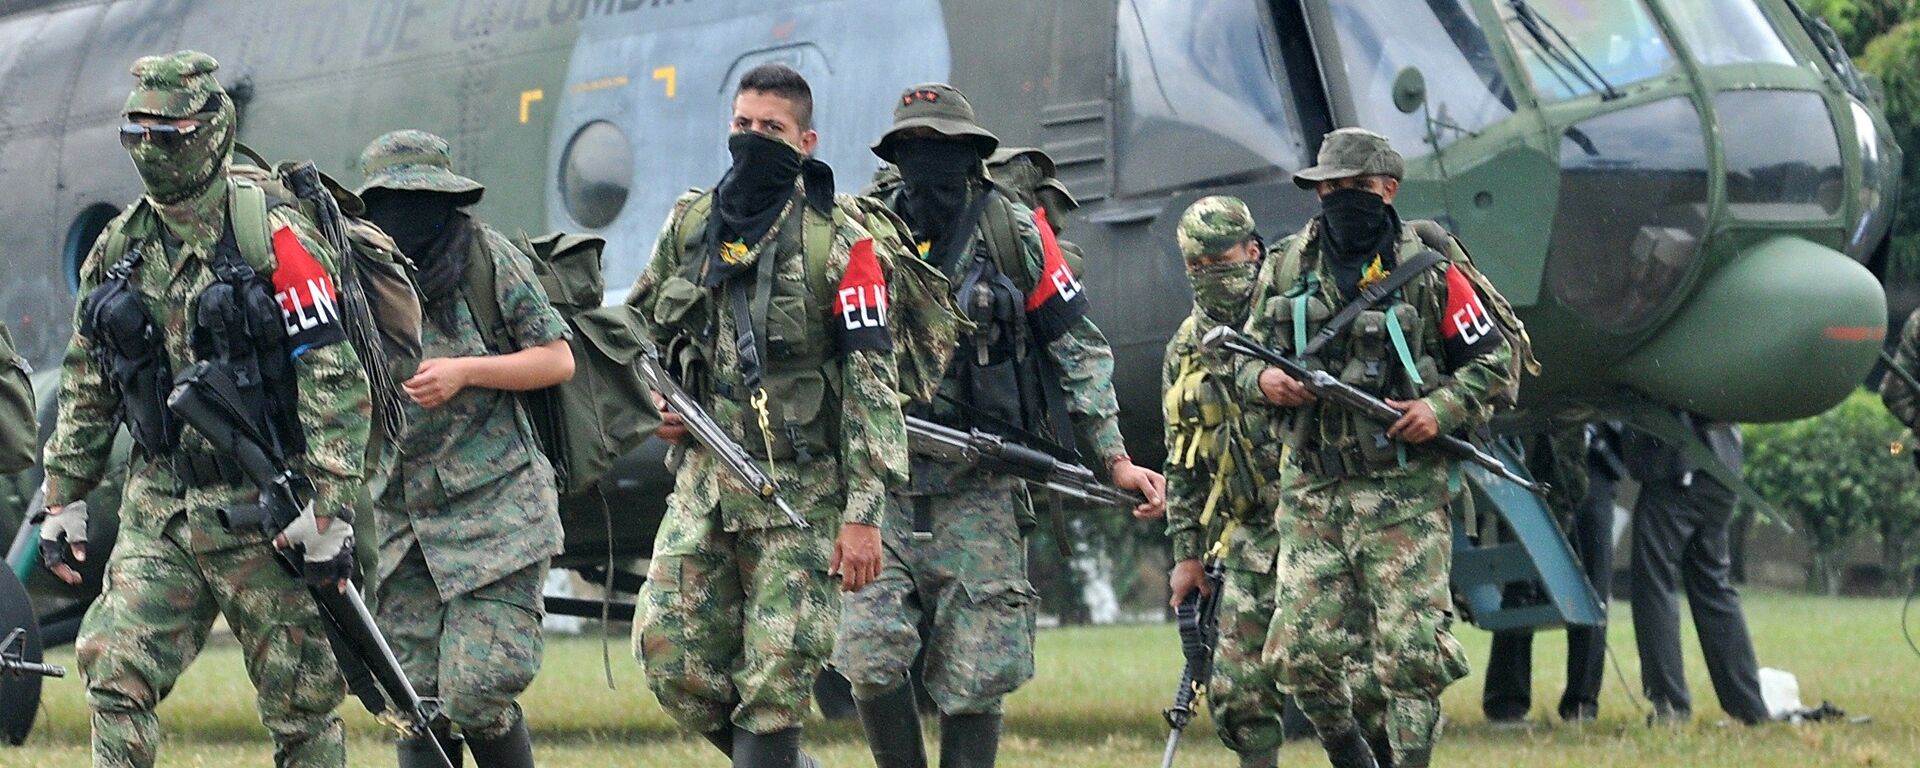 Members of the ELN (National Liberation Army) arrive in Cali, Colombia. (File) - Sputnik International, 1920, 04.09.2017